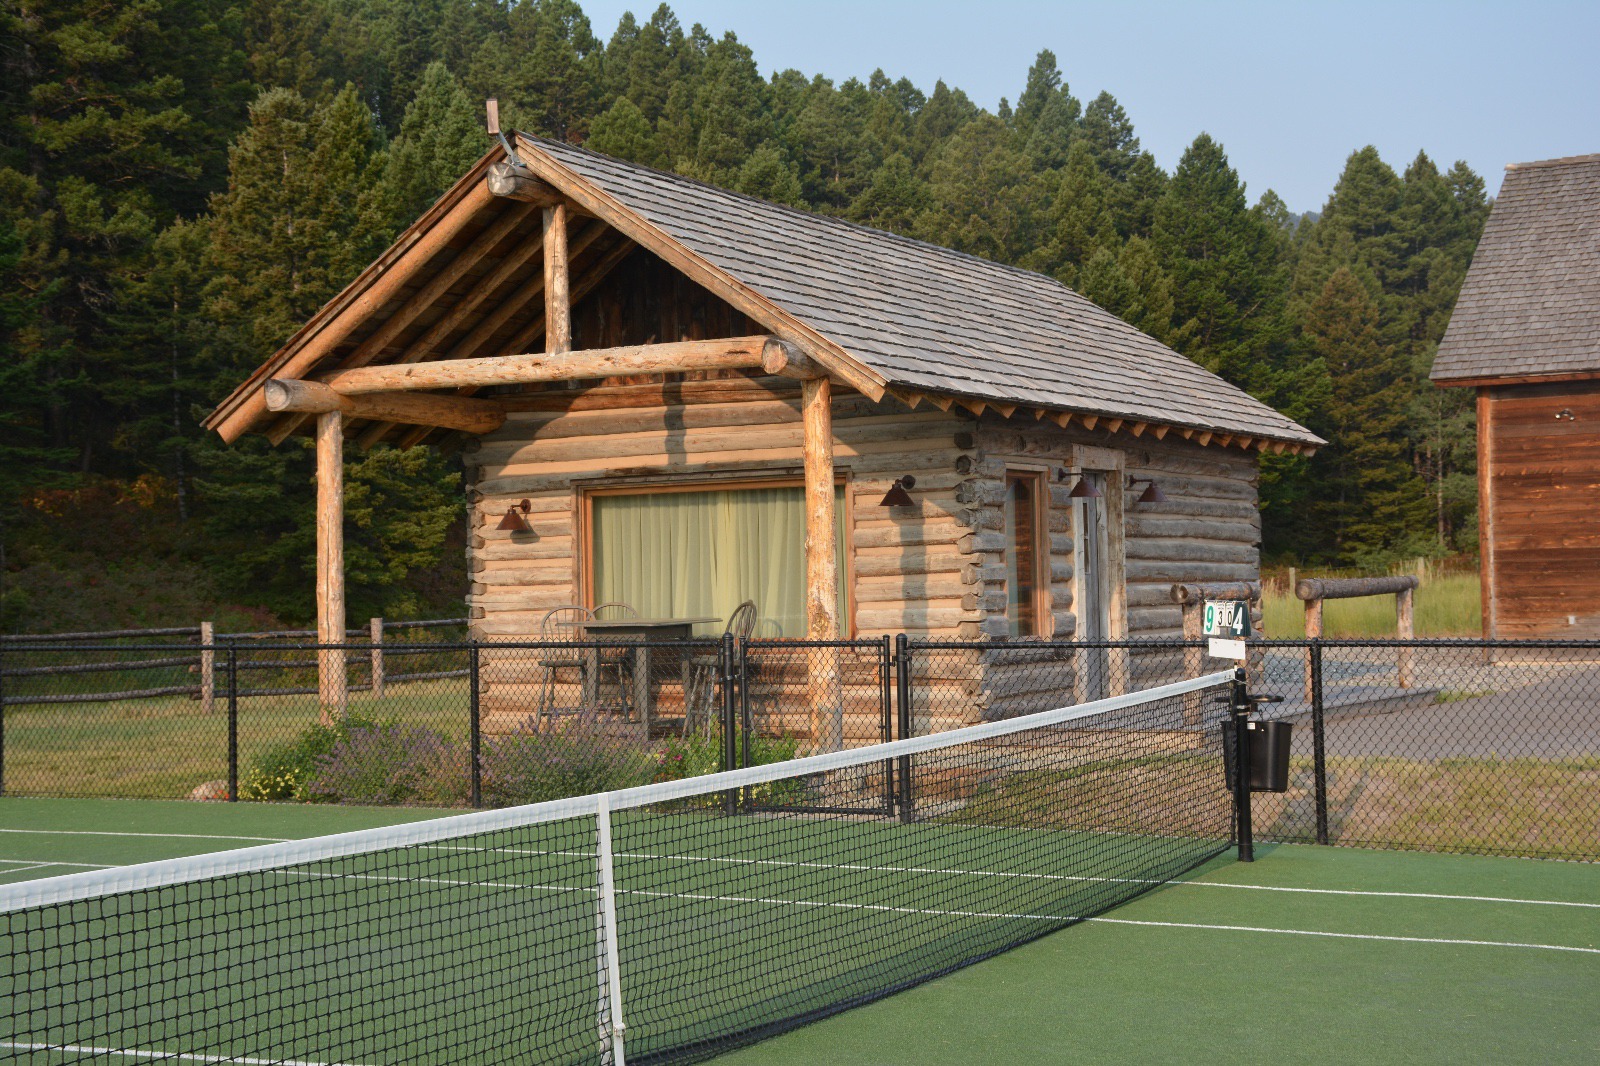 Exterior with tennis courts